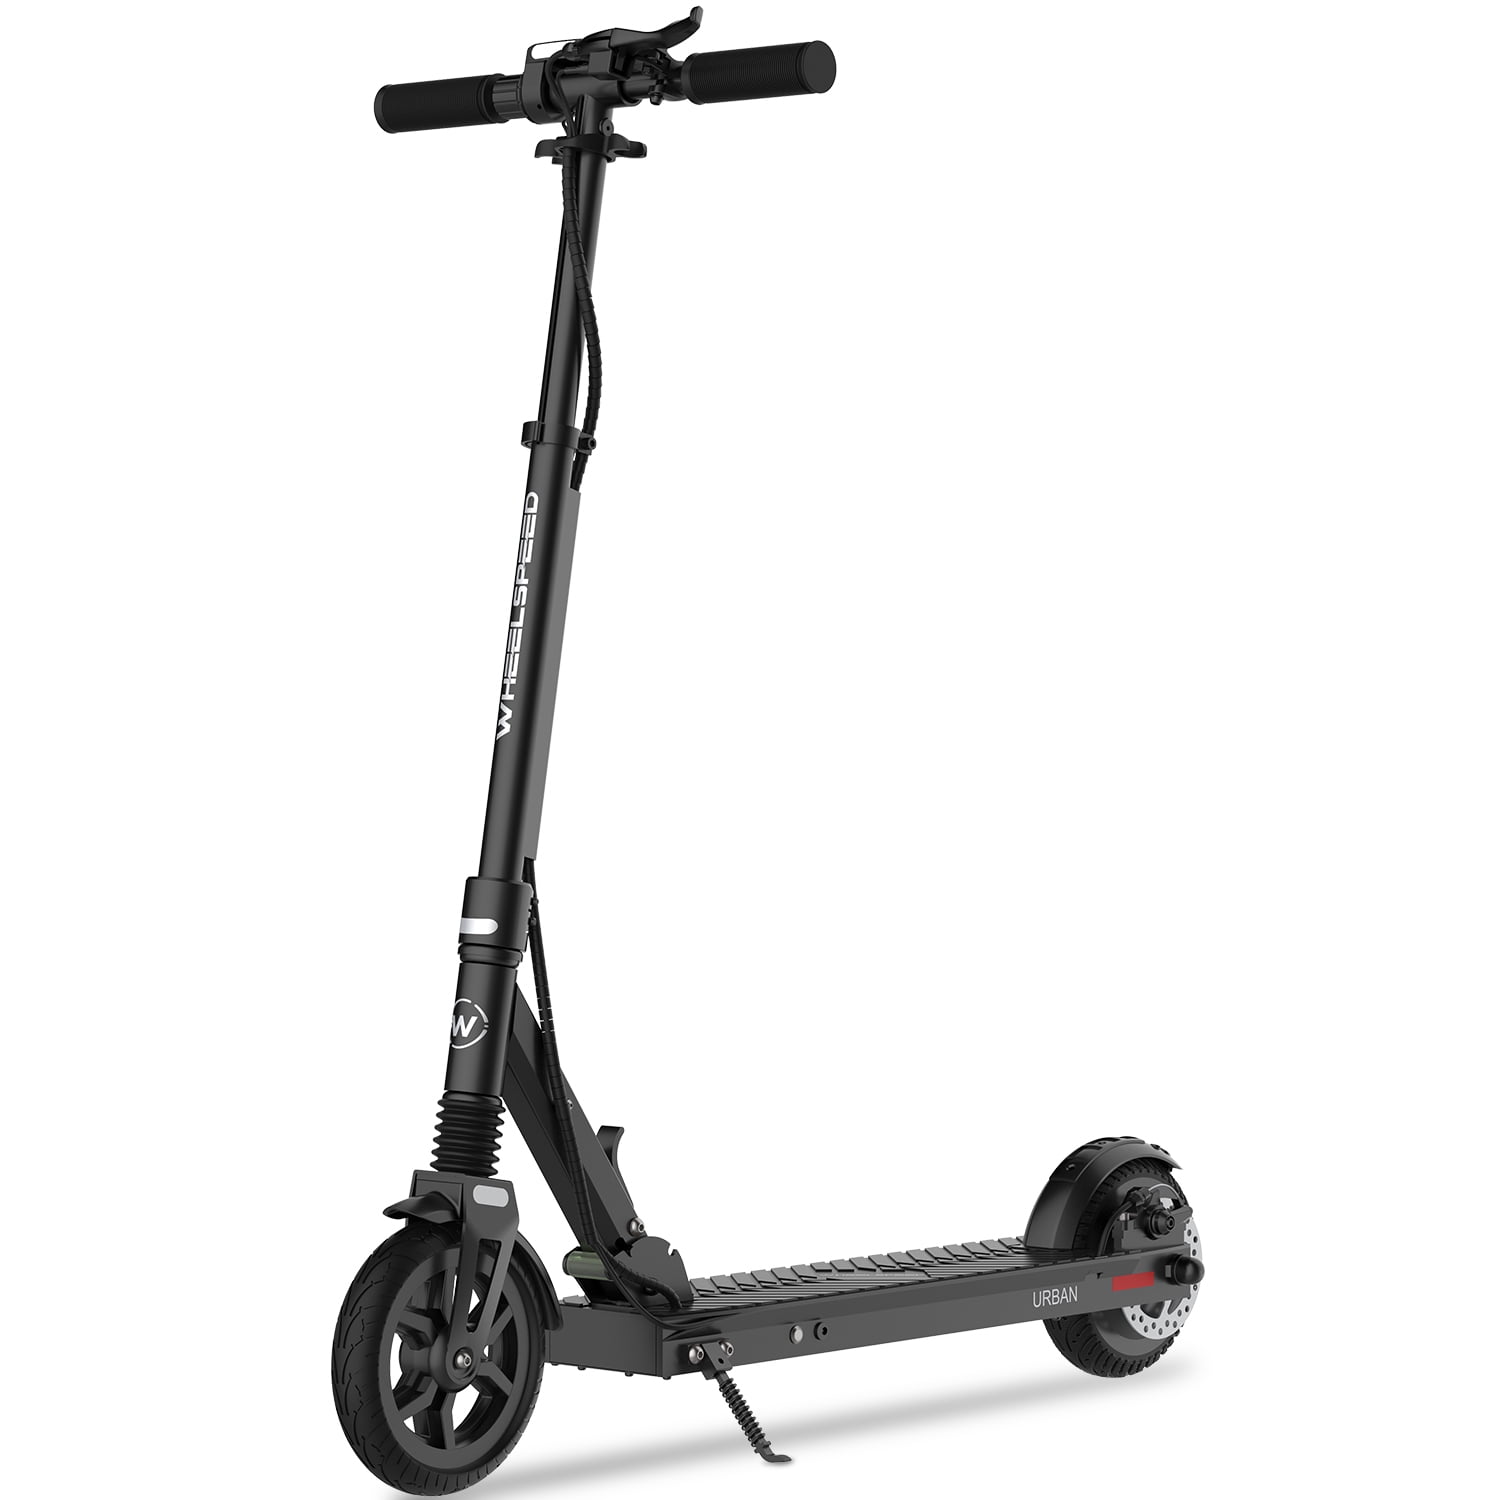 Wheelspeed Electric Scooter Primer, 12-14 Miles Long Range & 15 MPH  Lightweight Commuting Electric Scooter, 350W Motor & 8.5 Pneumatic Tires  Portable E-Scooter for Adults with Anti-Theft E-Lock 